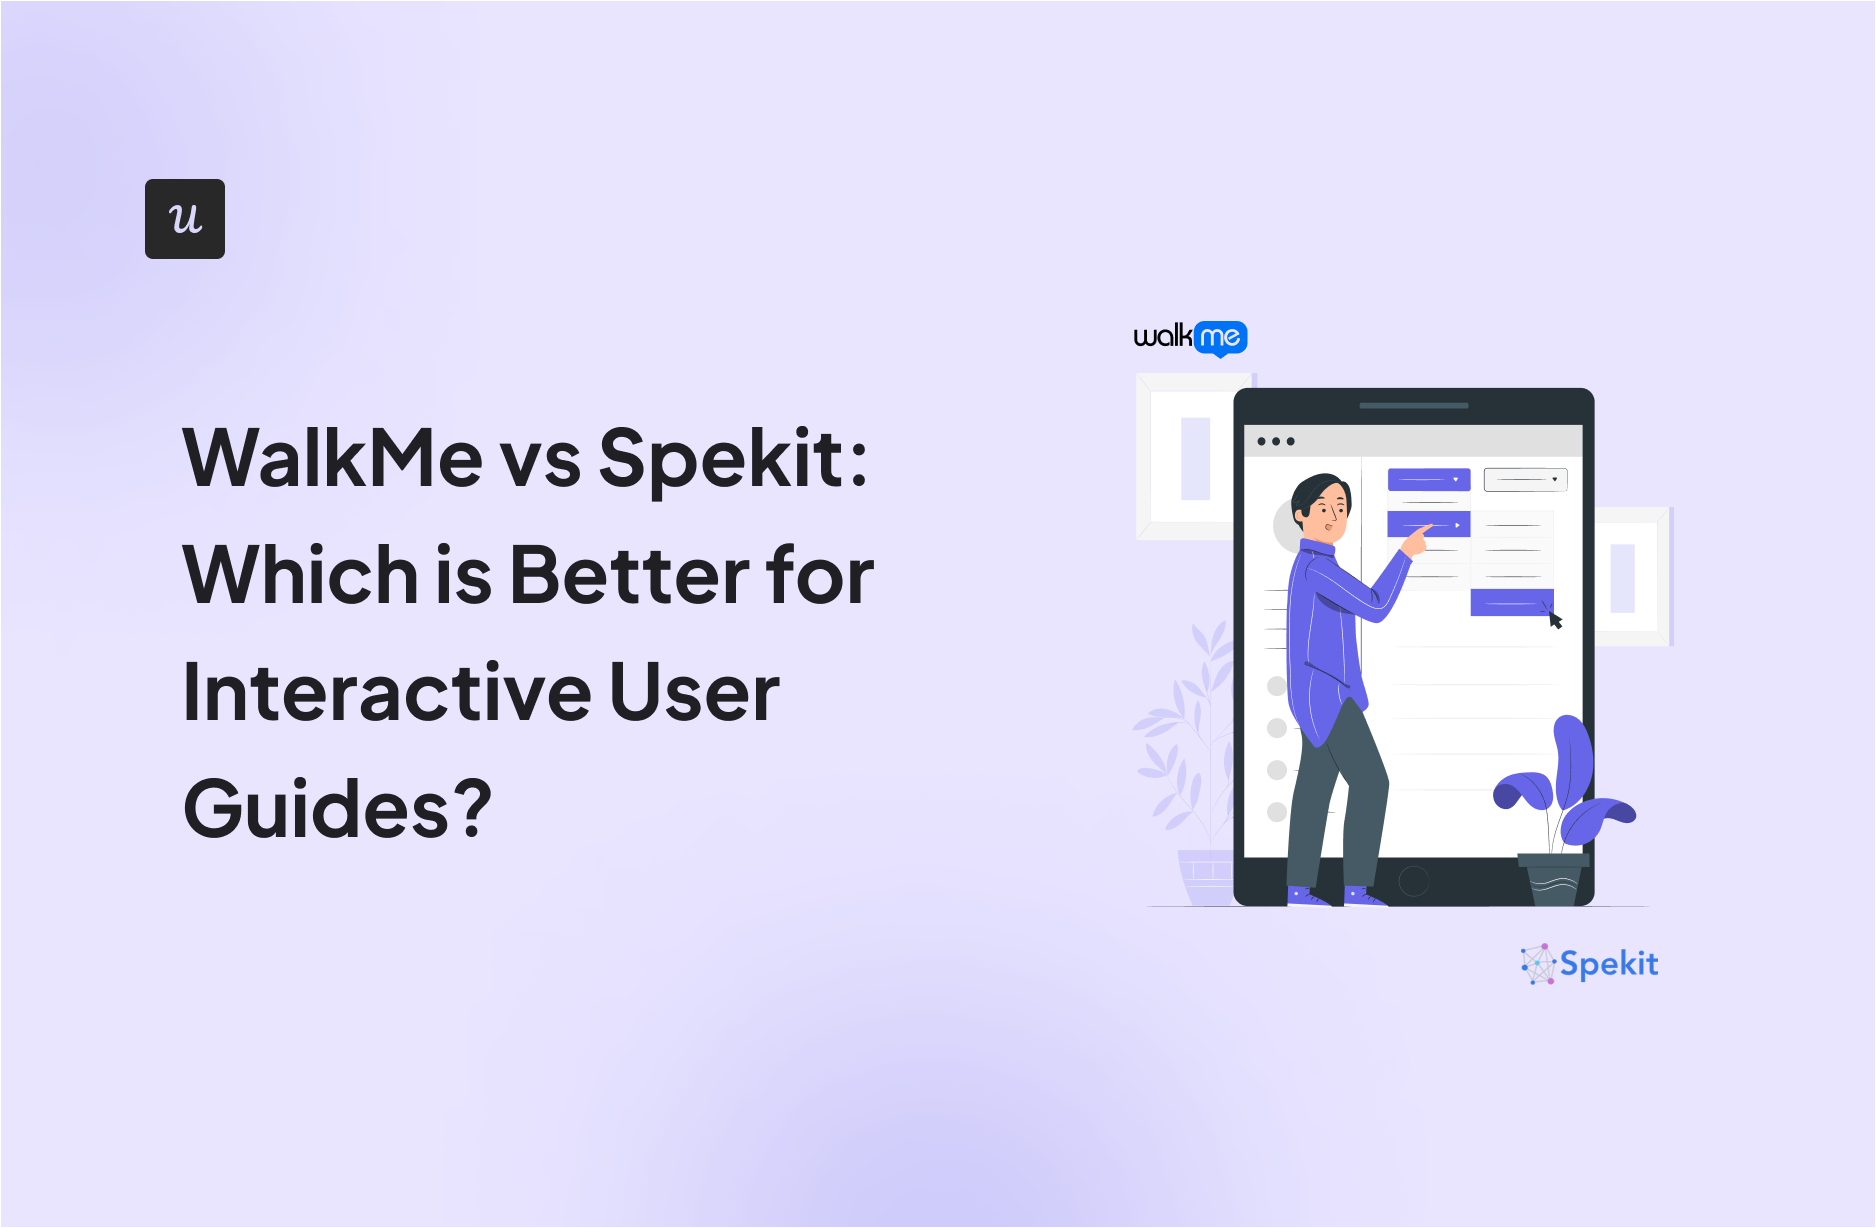 WalkMe vs Spekit: Which is Better for Interactive User Guides?